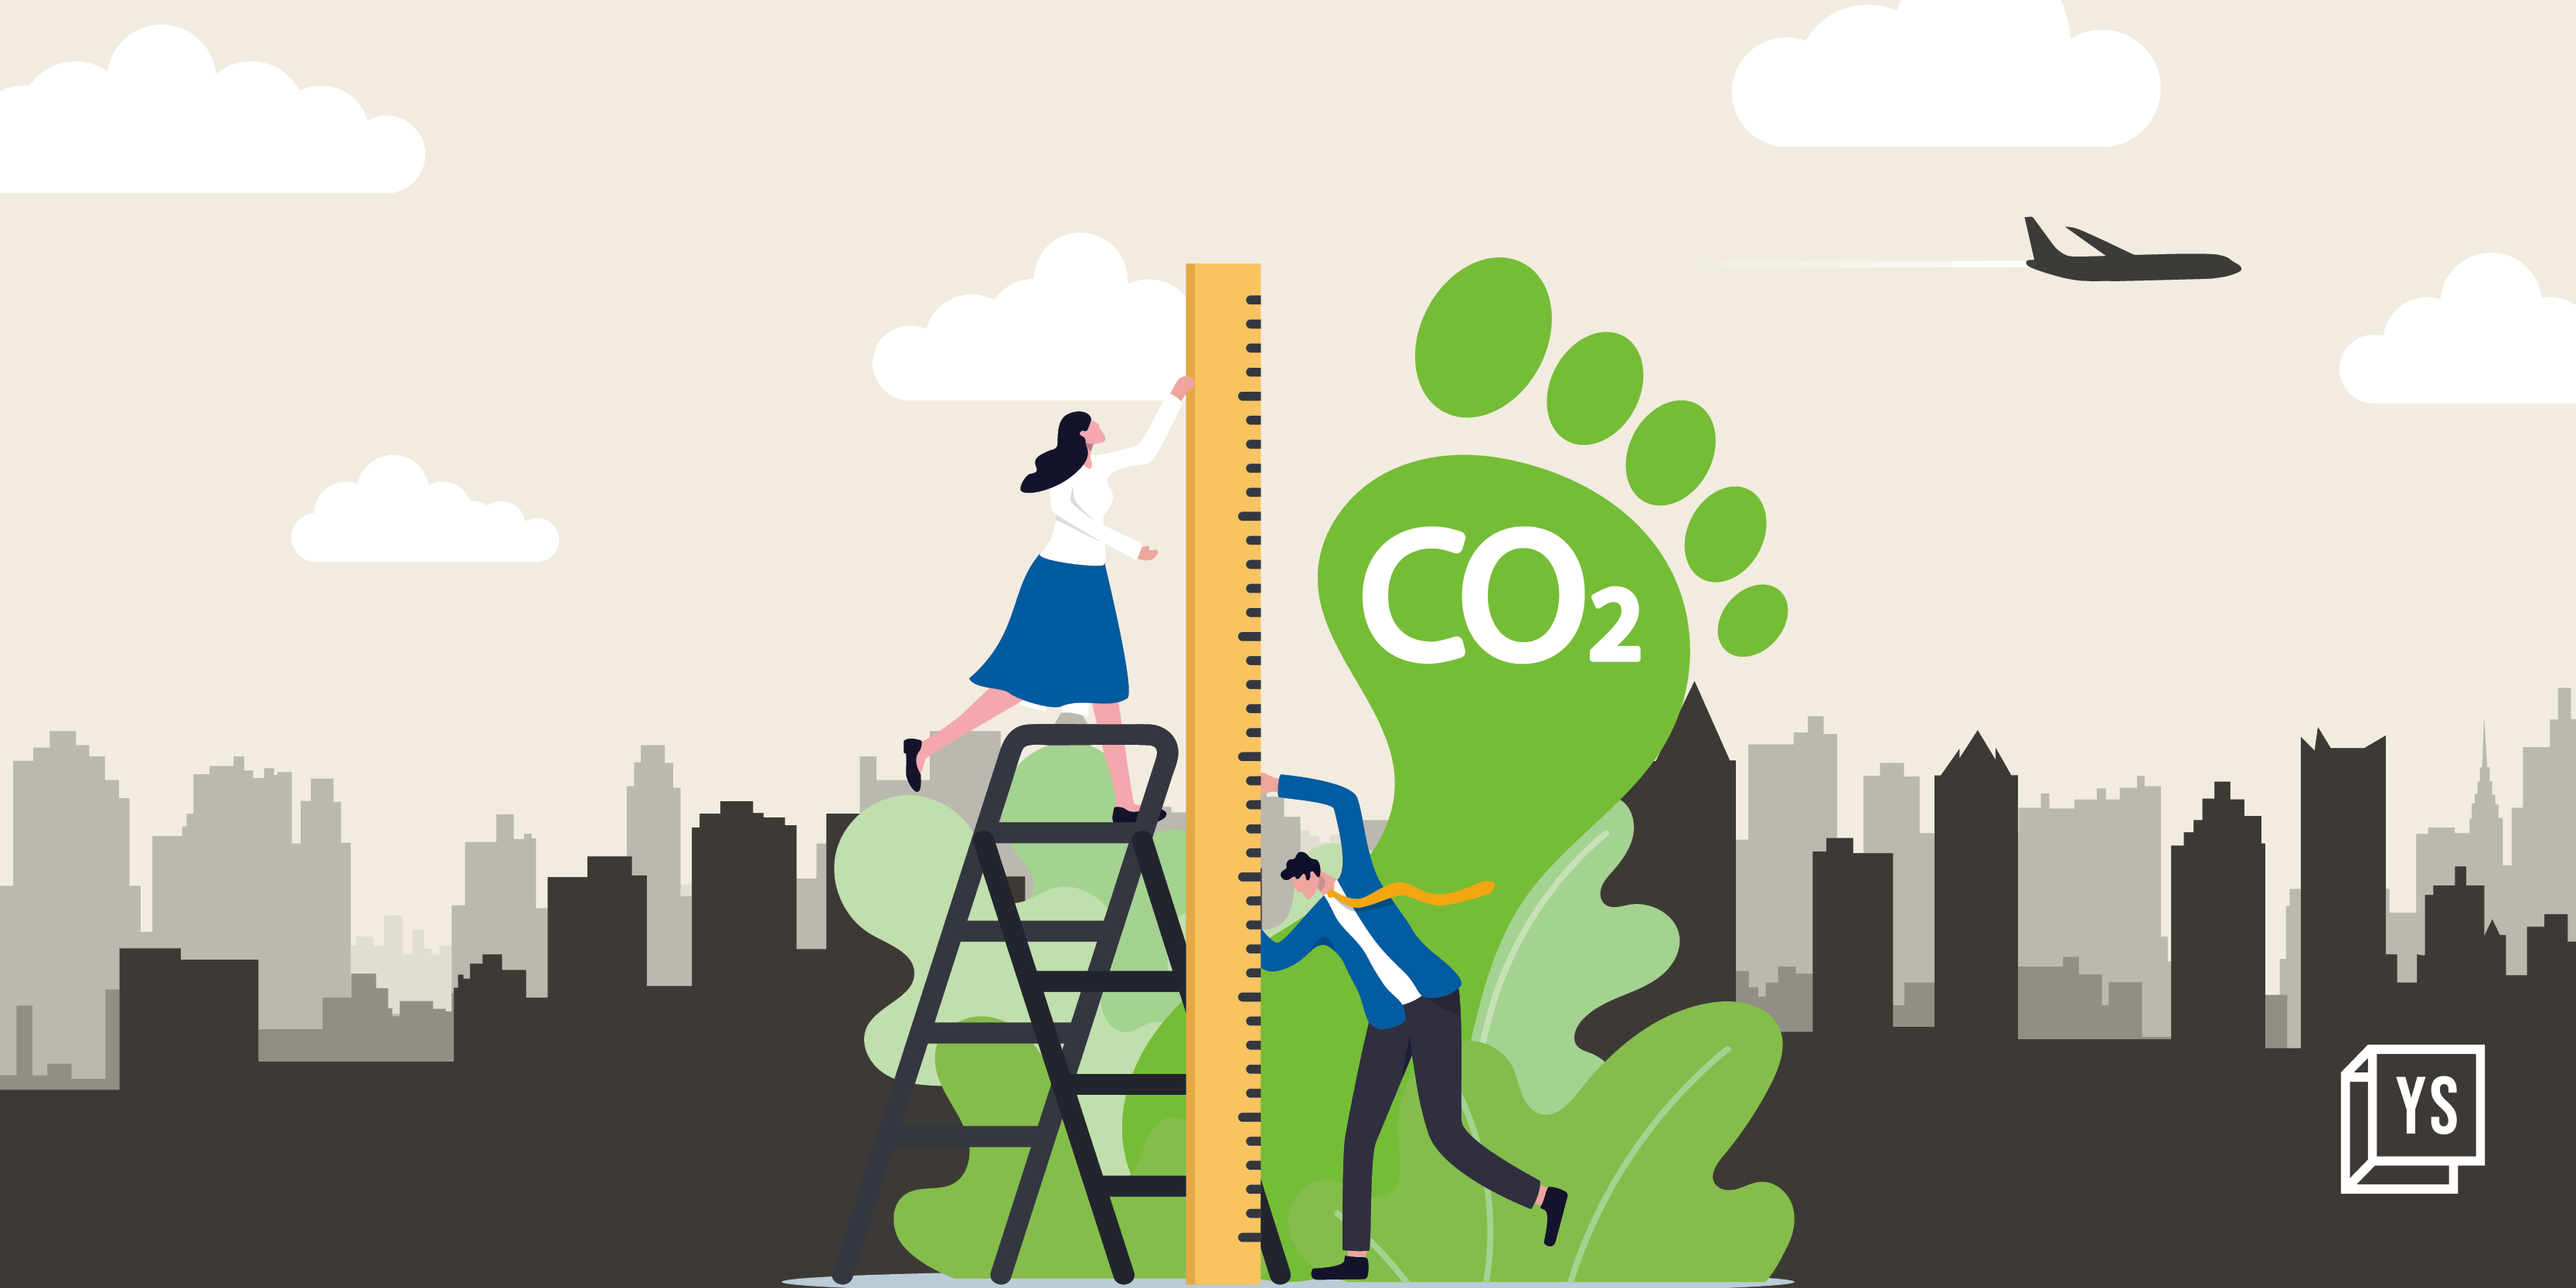 Calculate, reduce, offset: Is the next big startup opportunity in carbon management? 
